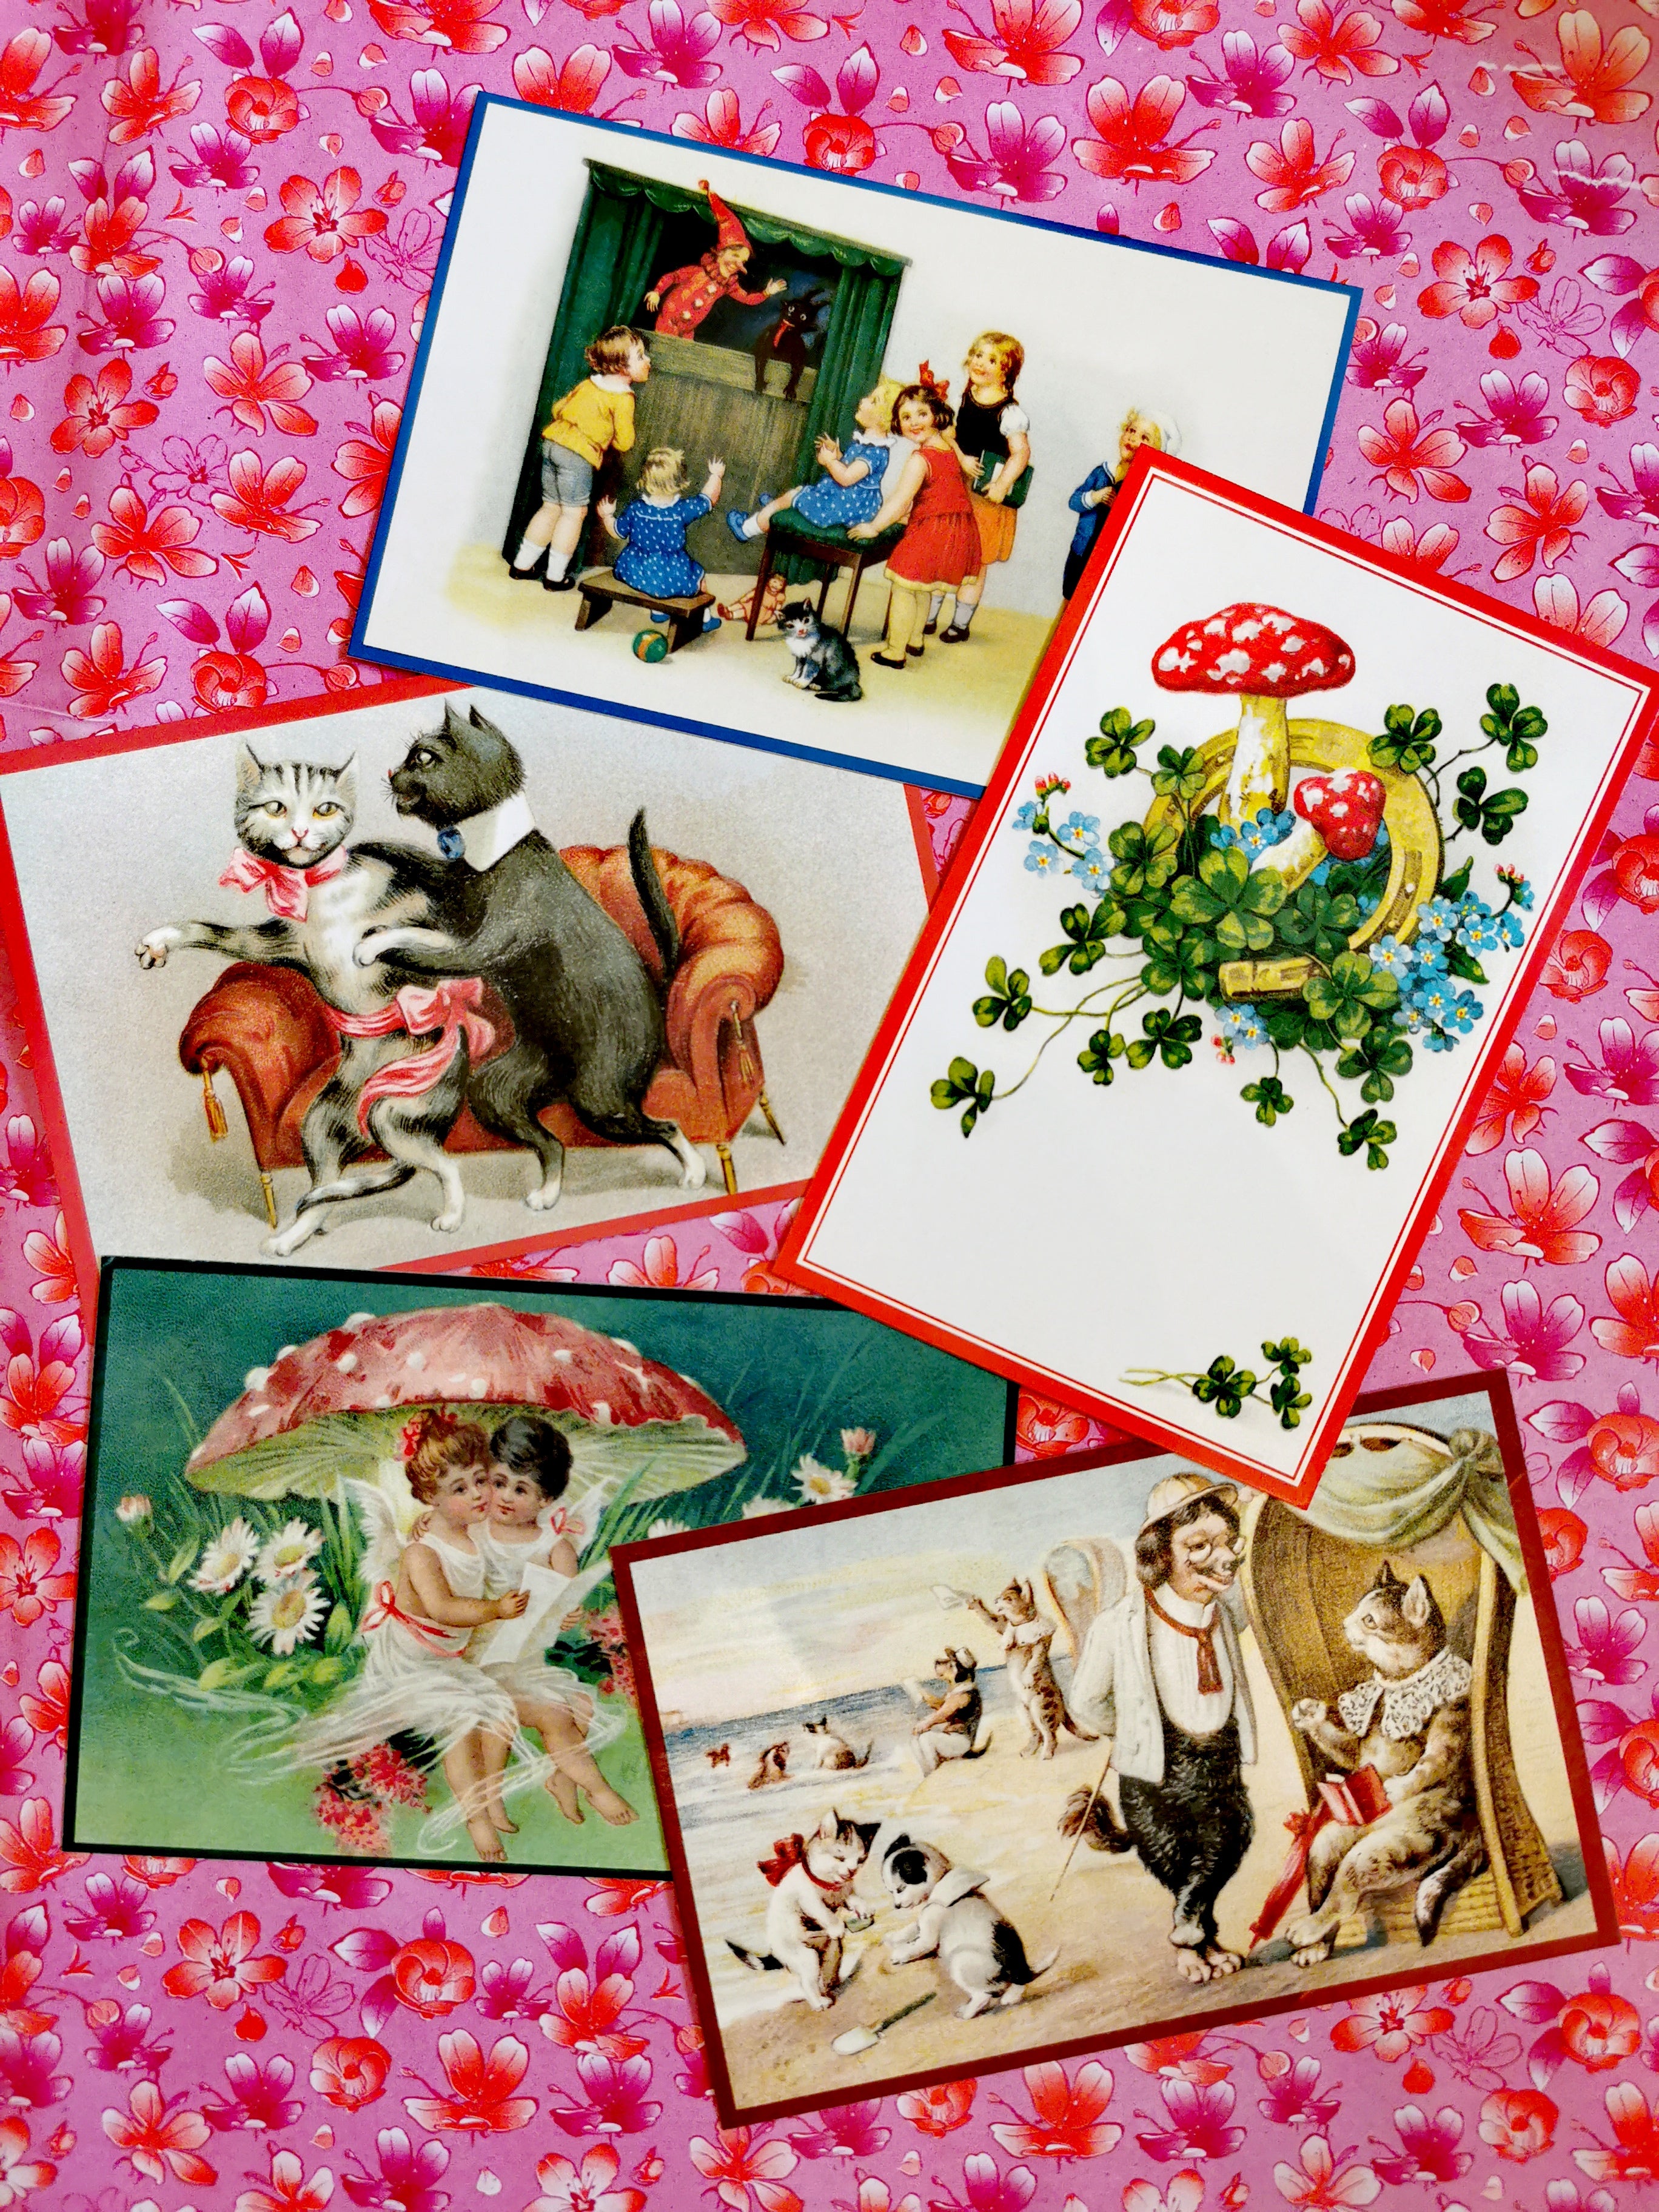 Set of 5 beautifull postcards with images taken from vintage (1910-1930) German illustrations of Punch and Judy, toadstools and cats, all our favourites!! 

Postcards come with envelopes.

 

